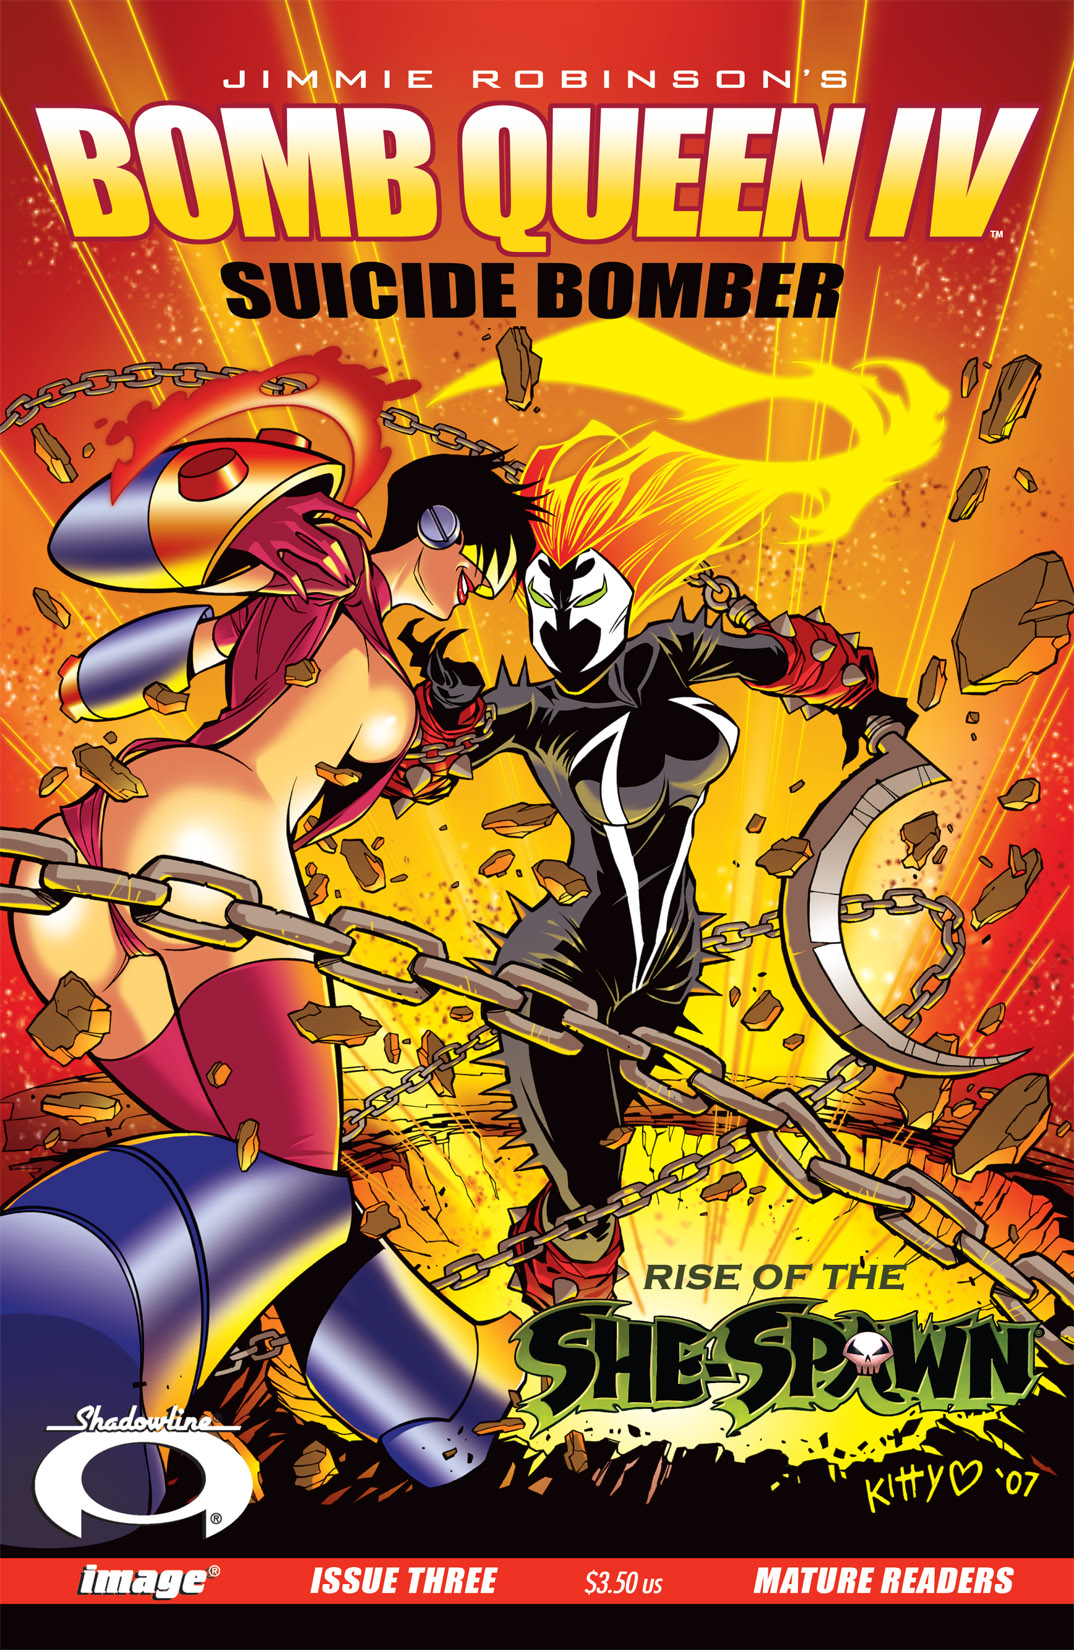 Read online Bomb Queen IV: Suicide Bomber comic -  Issue #3 - 1